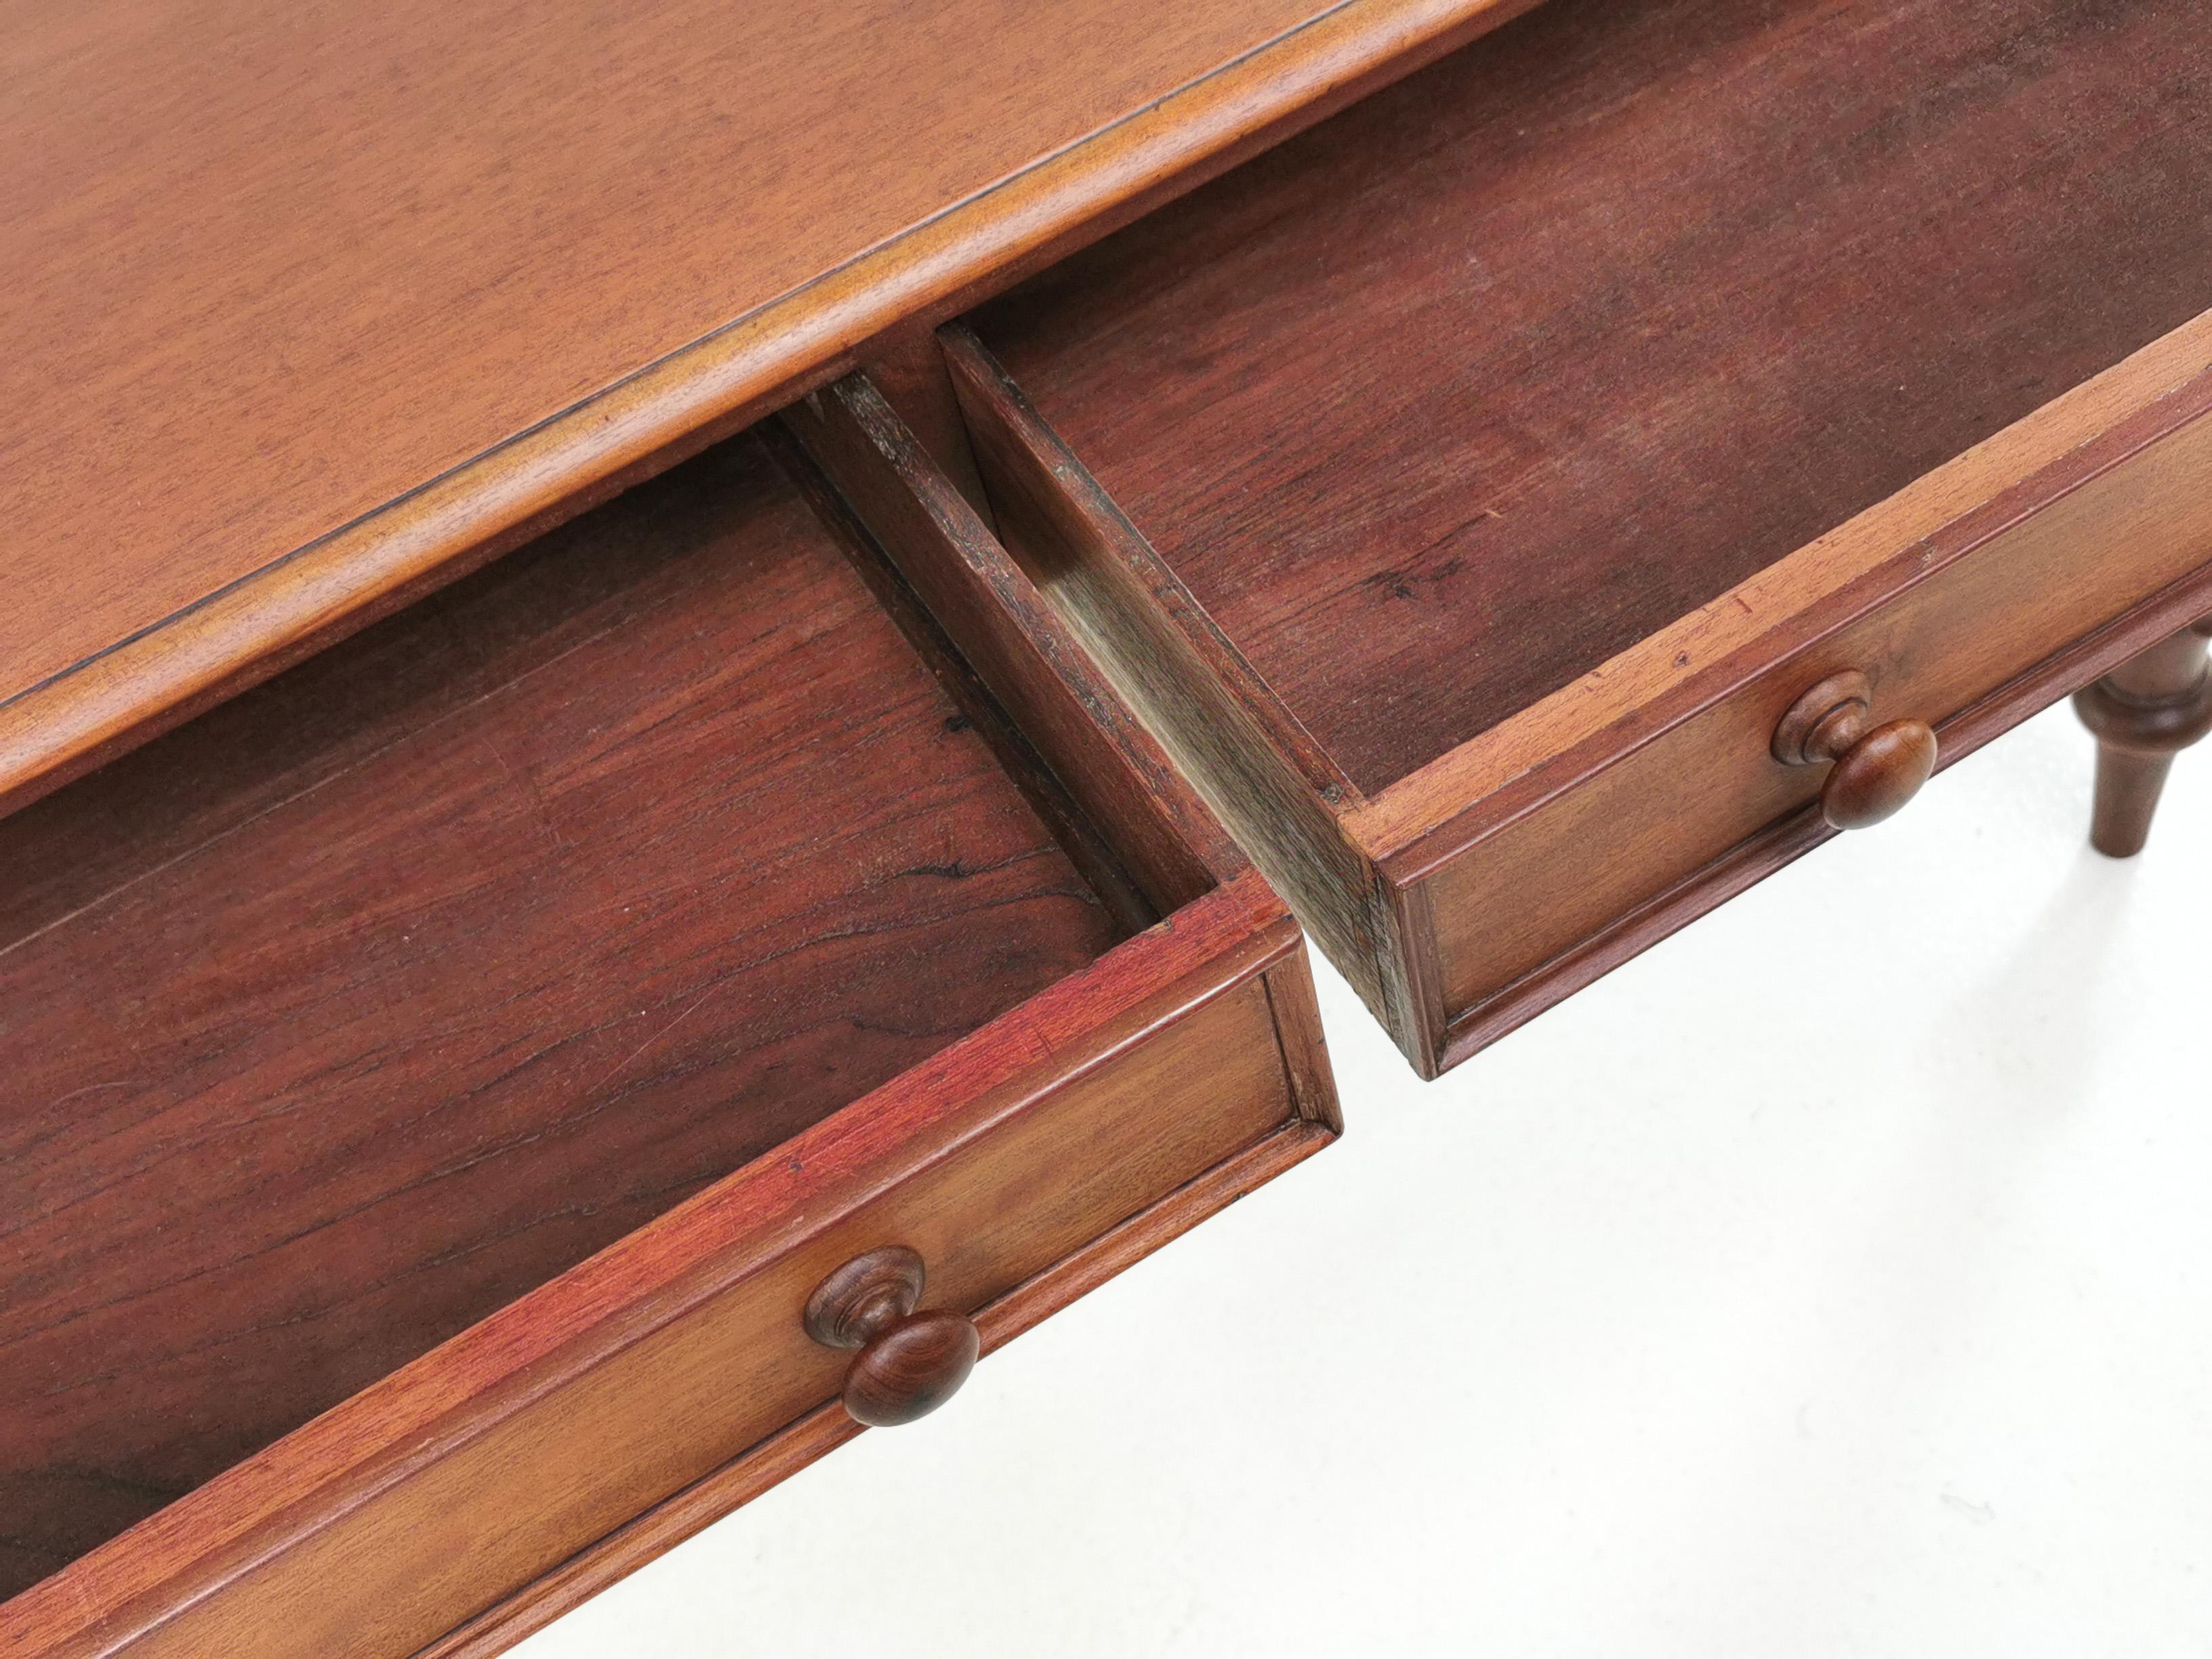 Victorian desk

Offered for sale a British late Victorian, mahogany, writing table, beautifully made with turned and fluted tapering legs, two drawers to the front with moulded handles and mahogany splash back or fitted frieze. 

Dimensions